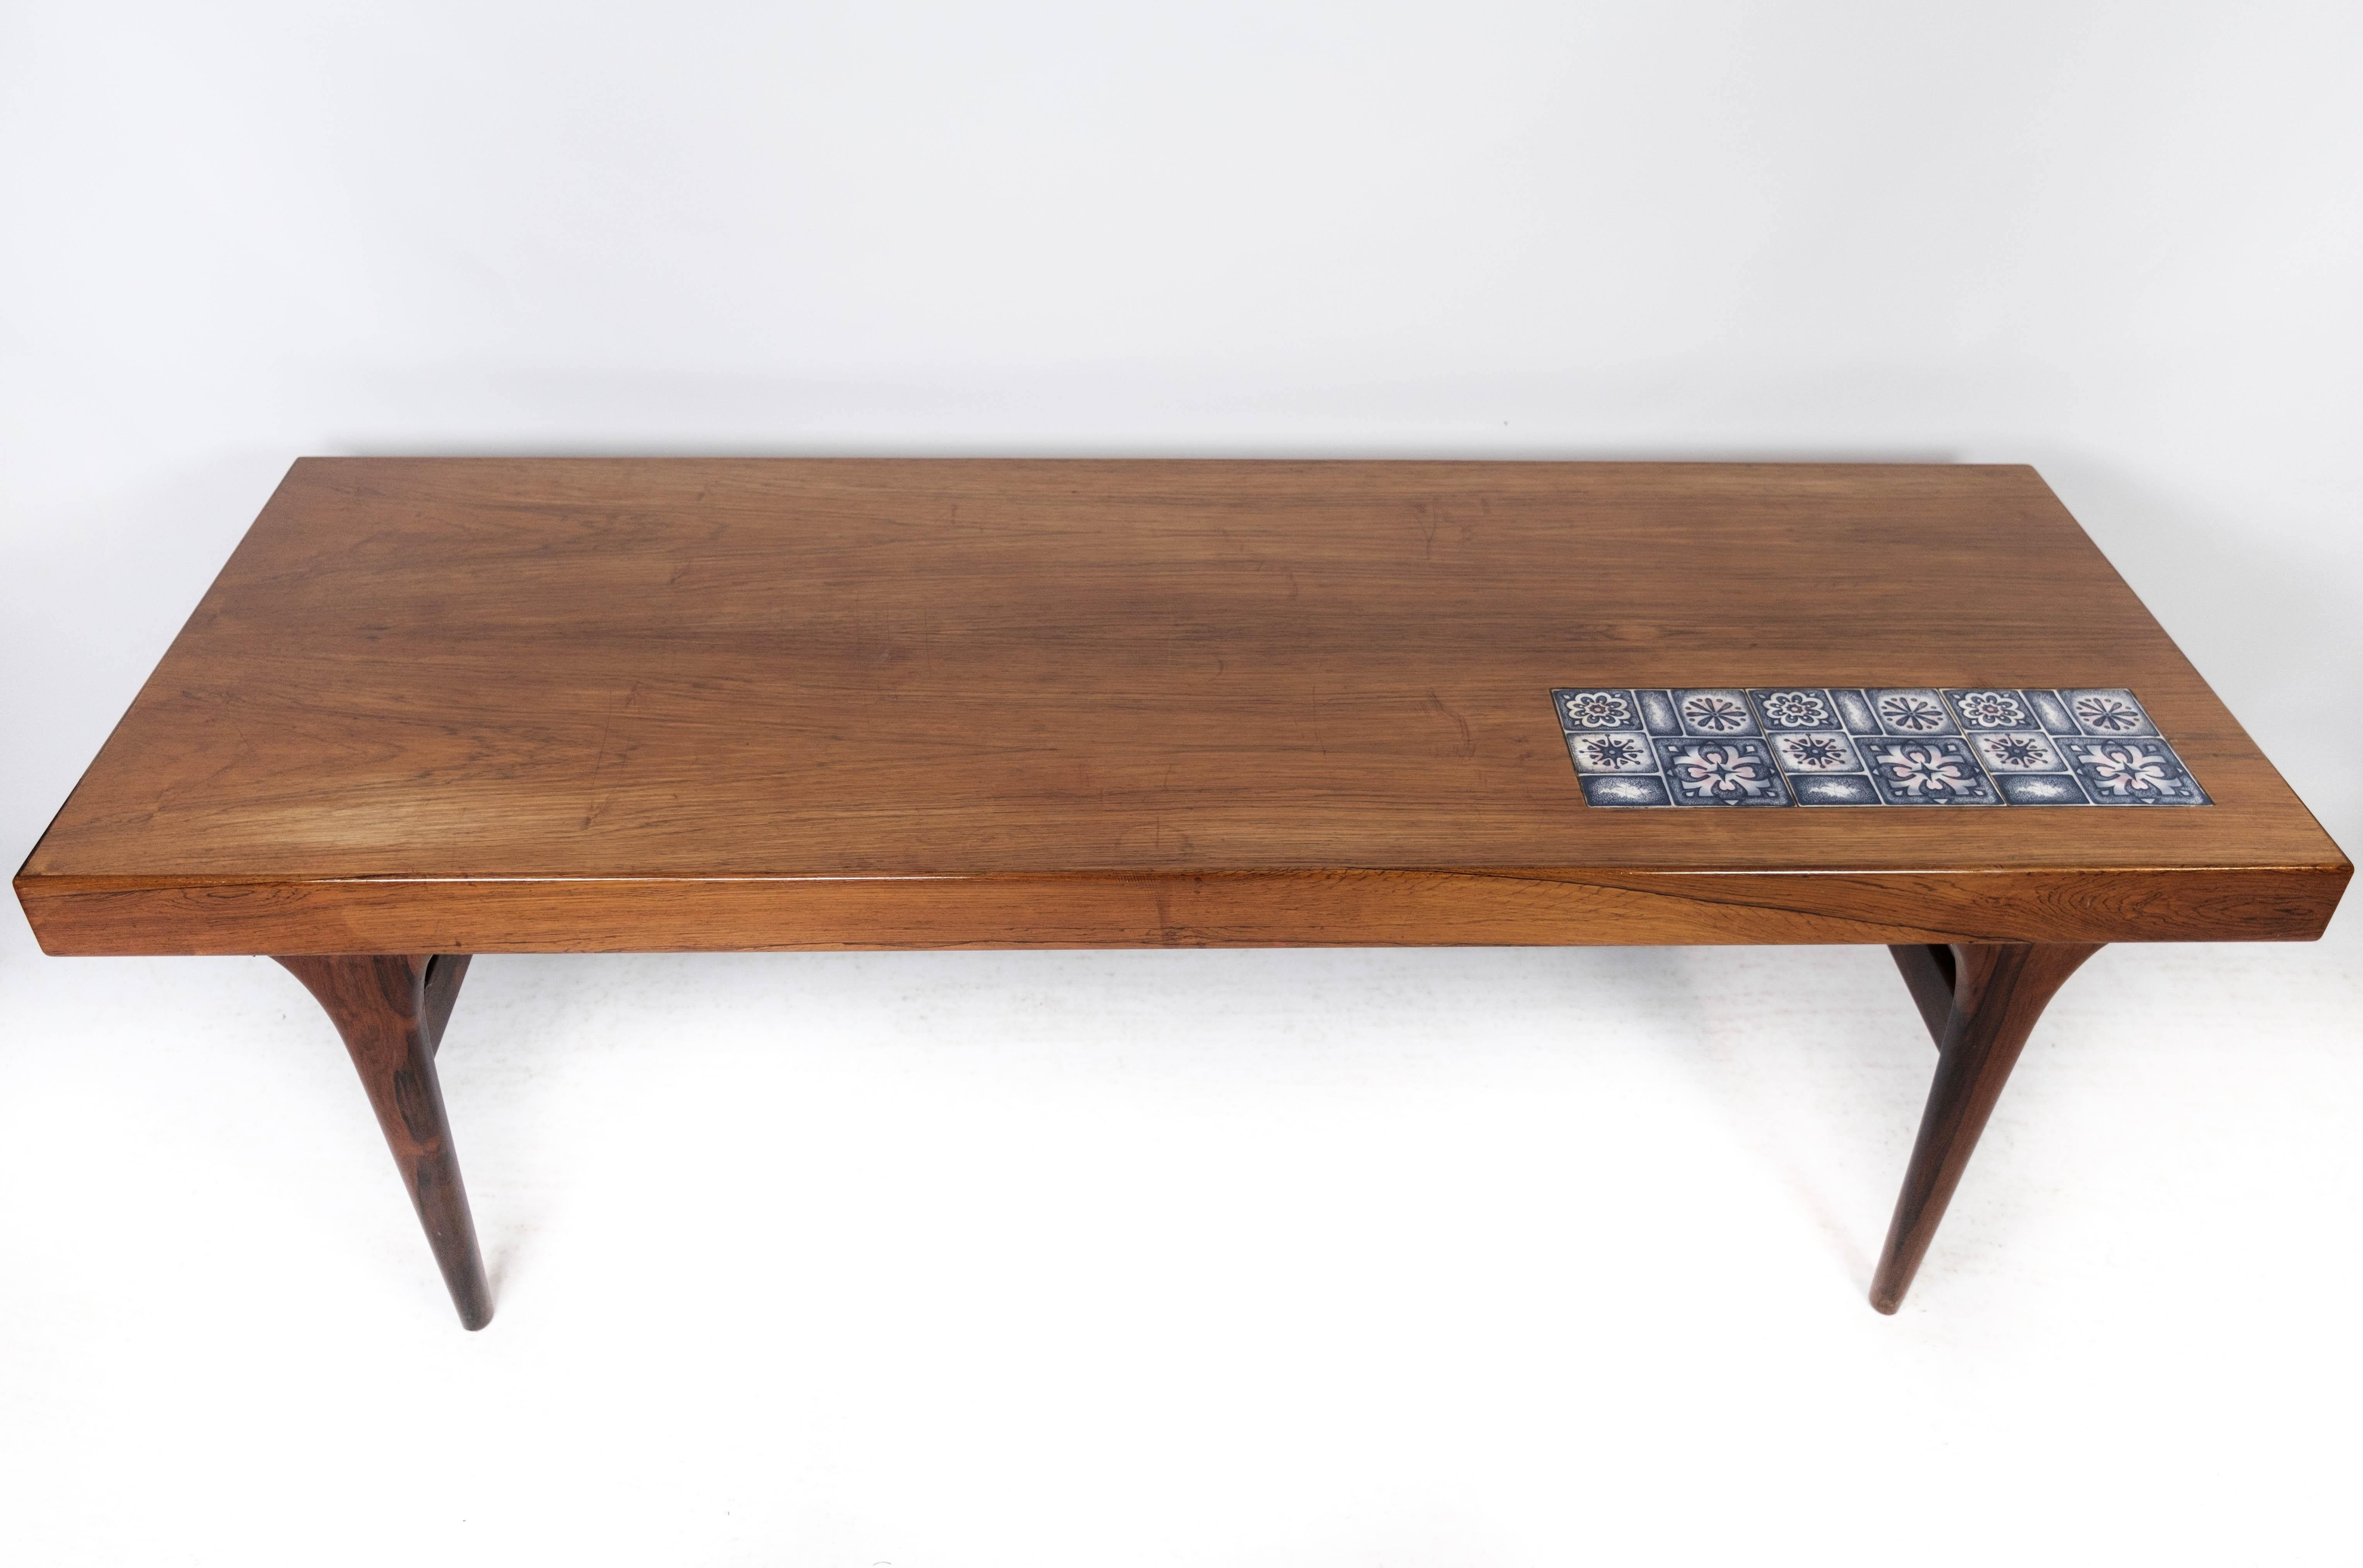 
This coffee table crafted from rosewood with blue tiles is a stunning piece of furniture that embodies the elegance of Danish design from the 1960s. Designed by Johannes Andersen and manufactured by Silkeborg Furniture, it showcases the meticulous